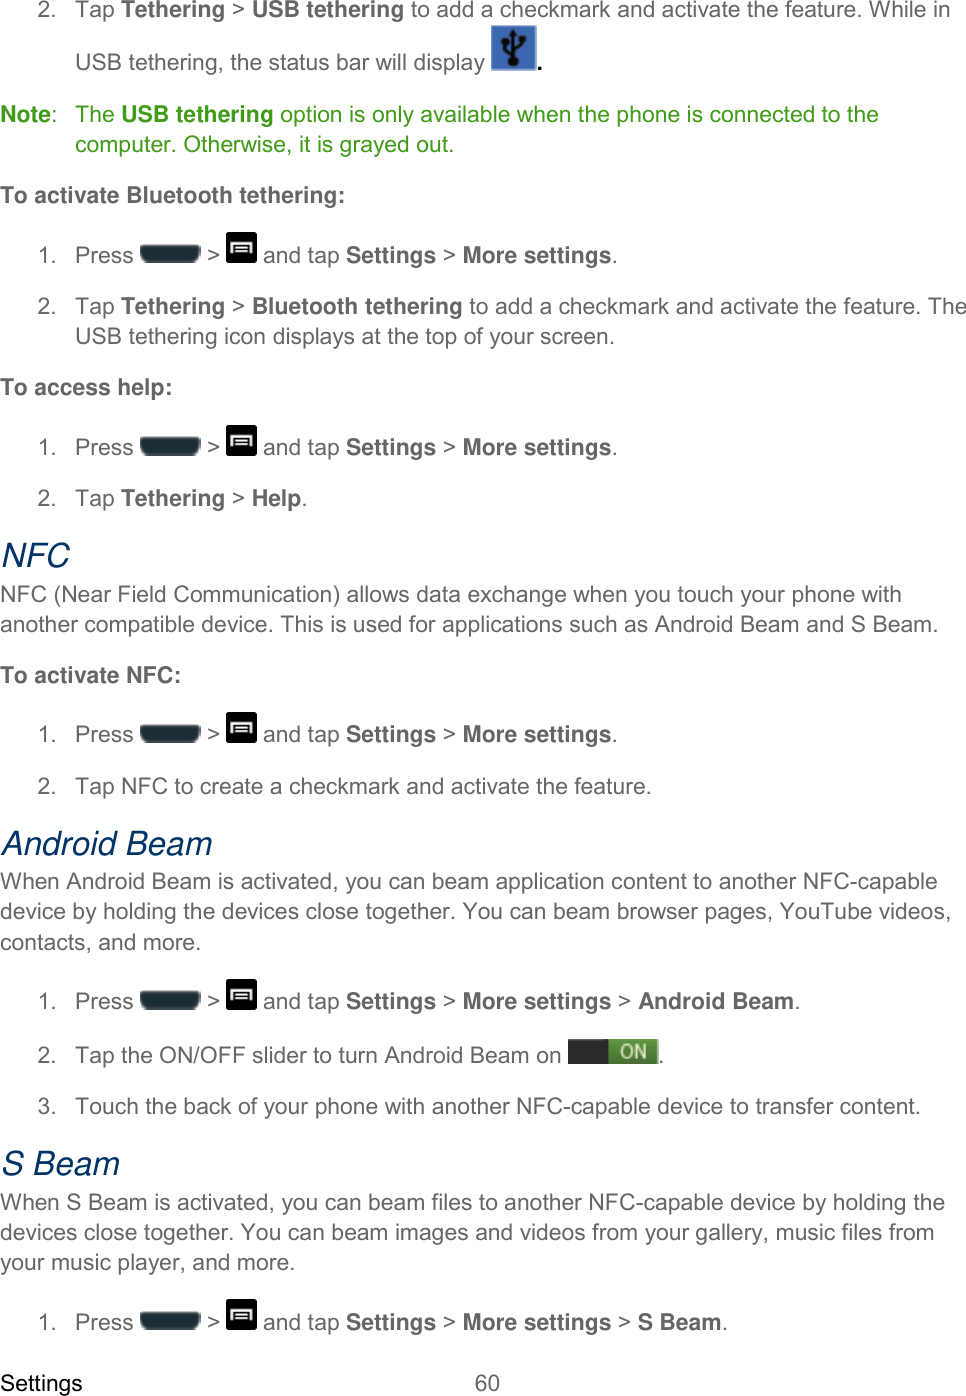 Settings 60   2.  Tap Tethering &gt; USB tethering to add a checkmark and activate the feature. While in USB tethering, the status bar will display  . Note:   The USB tethering option is only available when the phone is connected to the computer. Otherwise, it is grayed out. To activate Bluetooth tethering: 1.  Press   &gt;   and tap Settings &gt; More settings. 2.  Tap Tethering &gt; Bluetooth tethering to add a checkmark and activate the feature. The USB tethering icon displays at the top of your screen. To access help: 1.  Press   &gt;   and tap Settings &gt; More settings. 2.  Tap Tethering &gt; Help. NFC NFC (Near Field Communication) allows data exchange when you touch your phone with another compatible device. This is used for applications such as Android Beam and S Beam. To activate NFC: 1.  Press   &gt;   and tap Settings &gt; More settings. 2.  Tap NFC to create a checkmark and activate the feature. Android Beam When Android Beam is activated, you can beam application content to another NFC-capable device by holding the devices close together. You can beam browser pages, YouTube videos, contacts, and more. 1.  Press   &gt;   and tap Settings &gt; More settings &gt; Android Beam. 2.  Tap the ON/OFF slider to turn Android Beam on . 3.  Touch the back of your phone with another NFC-capable device to transfer content. S Beam When S Beam is activated, you can beam files to another NFC-capable device by holding the devices close together. You can beam images and videos from your gallery, music files from your music player, and more. 1.  Press   &gt;   and tap Settings &gt; More settings &gt; S Beam. 